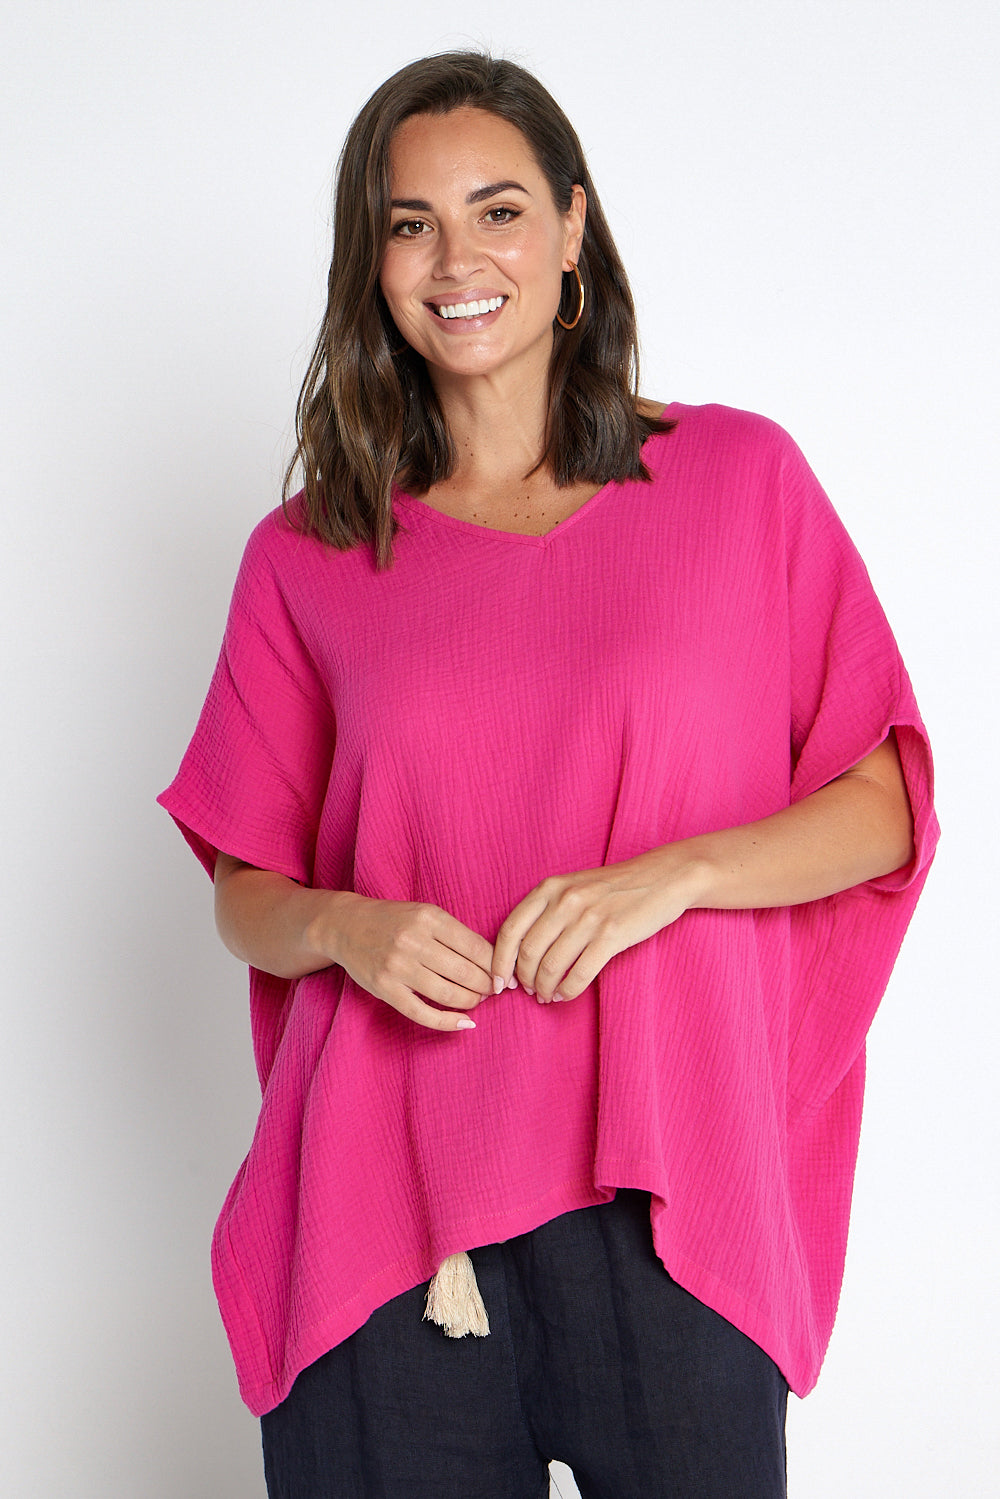 Summer Fling Top in Hot Pink- Available in Plus